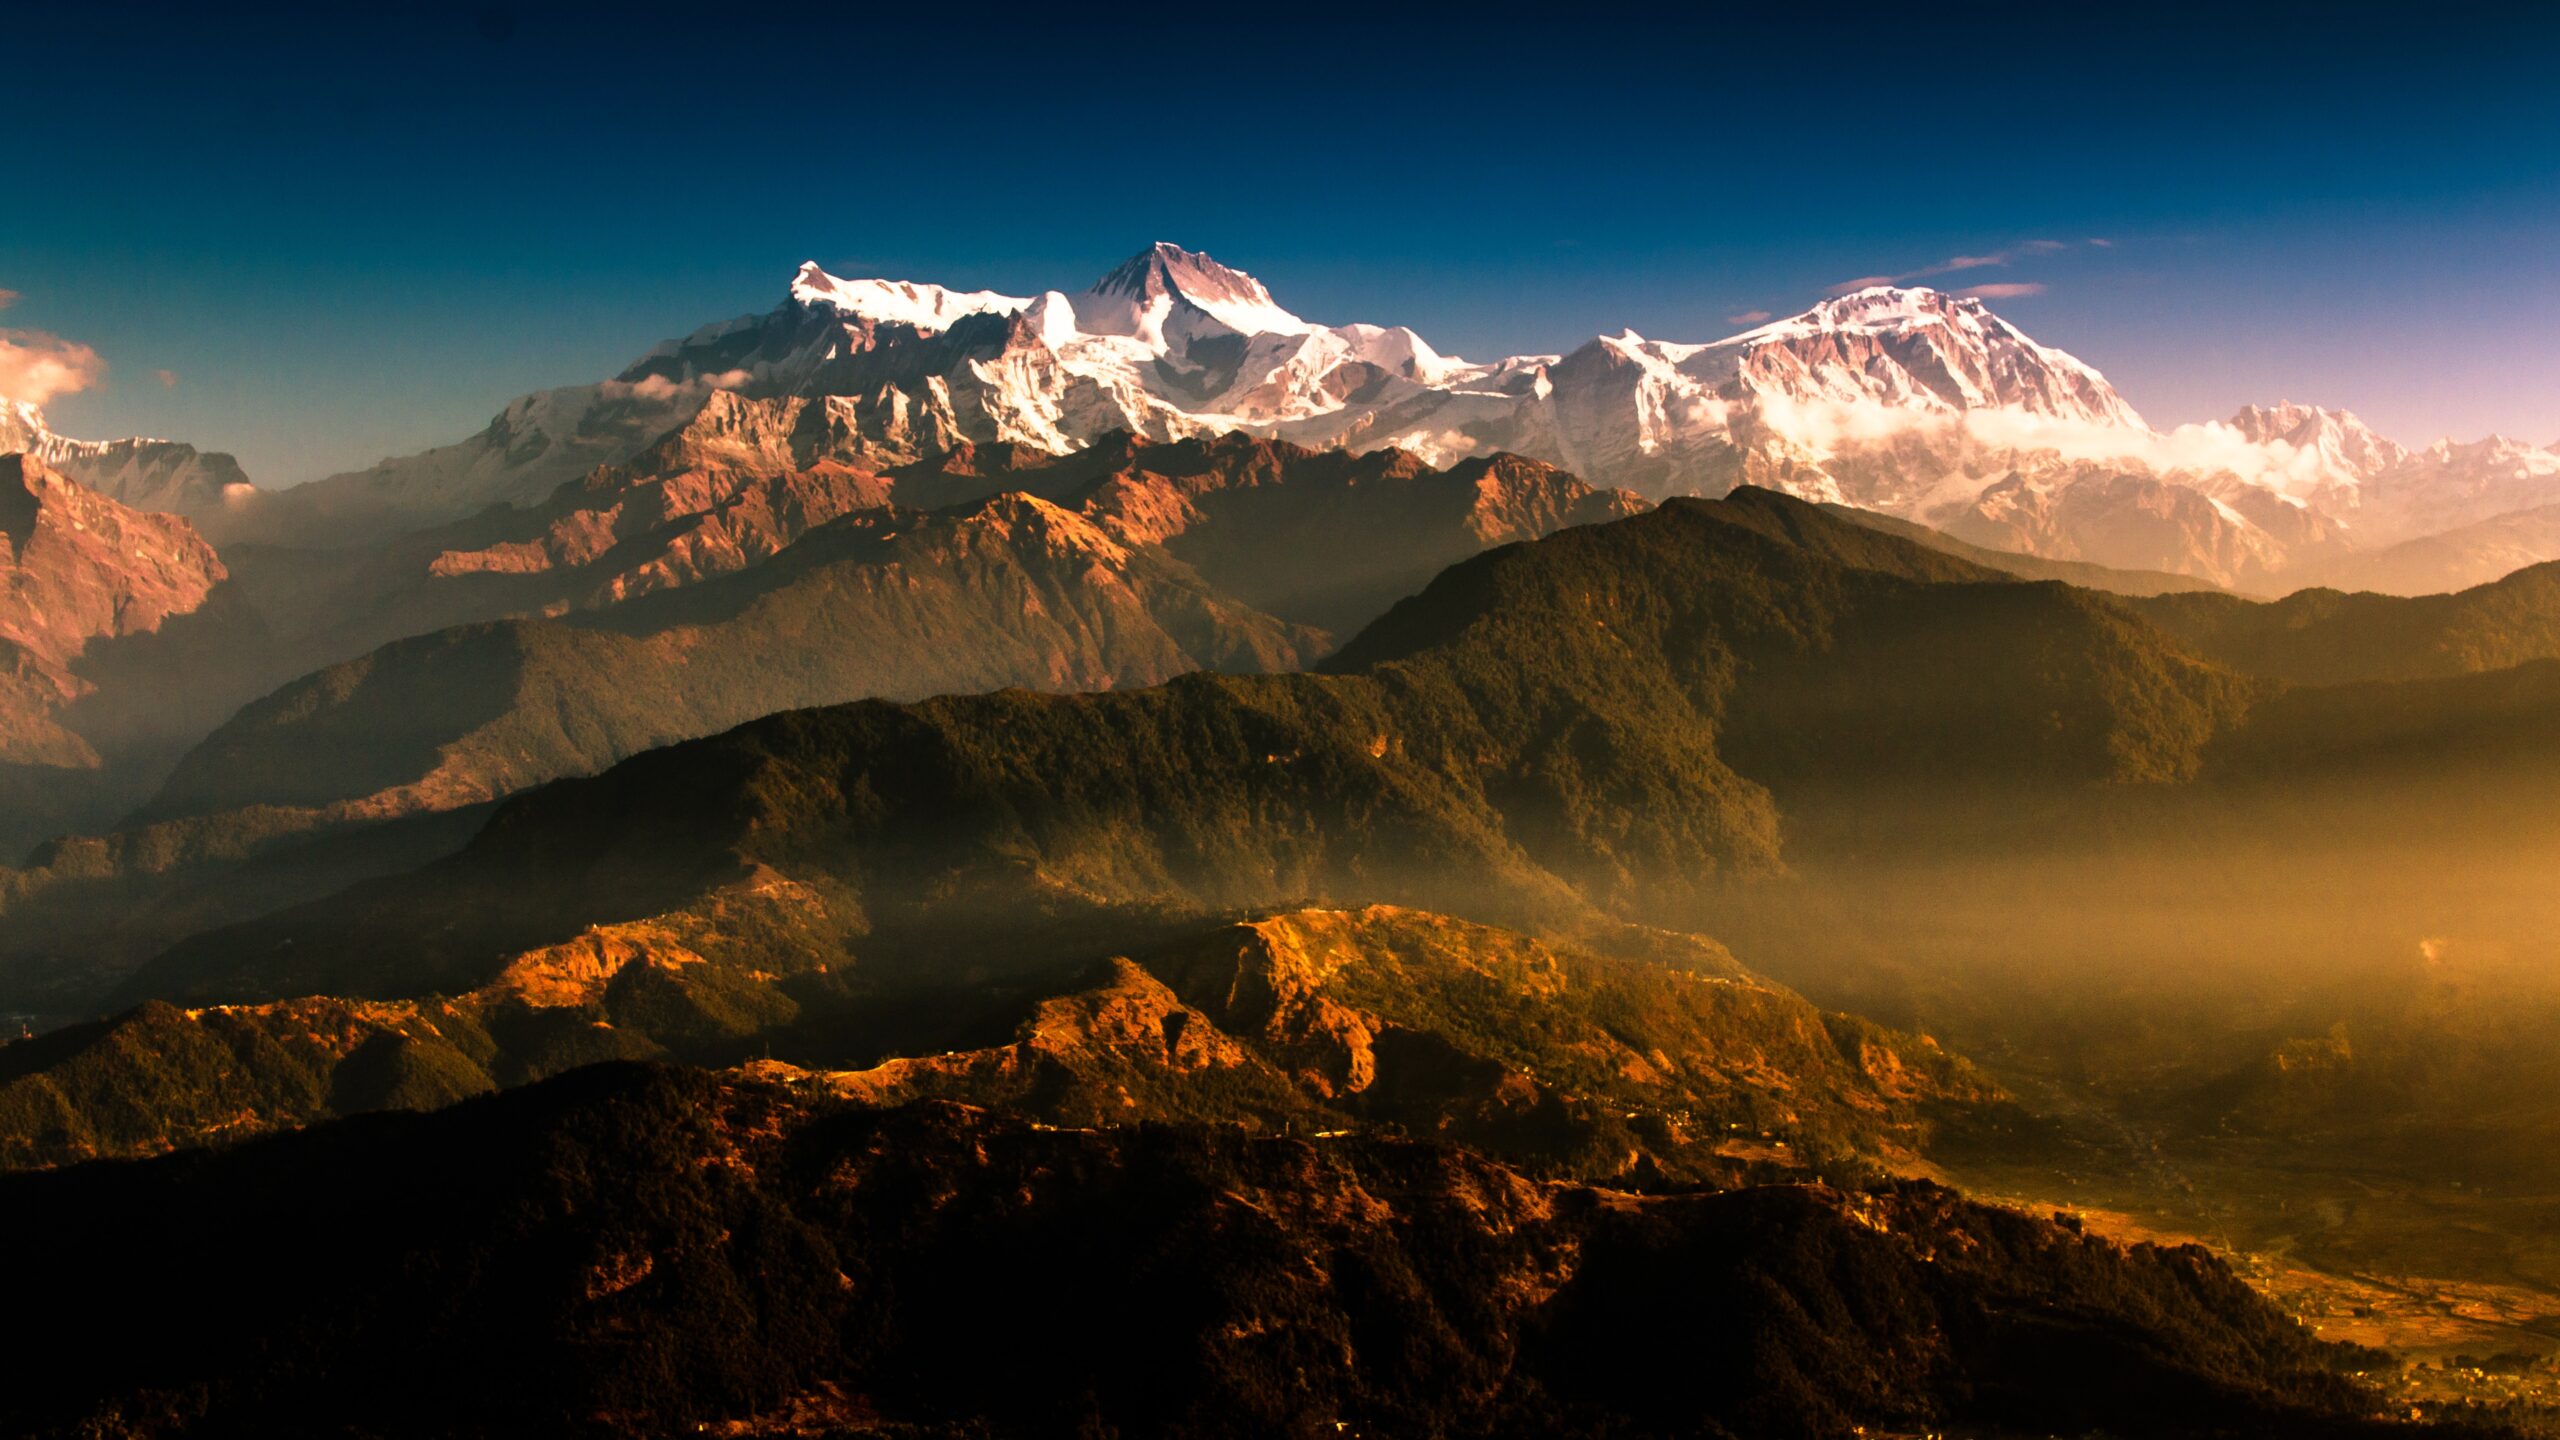 A stunning mountain range with snow capped mountains in the background, on the journey from Kathmandu to Pokhara.